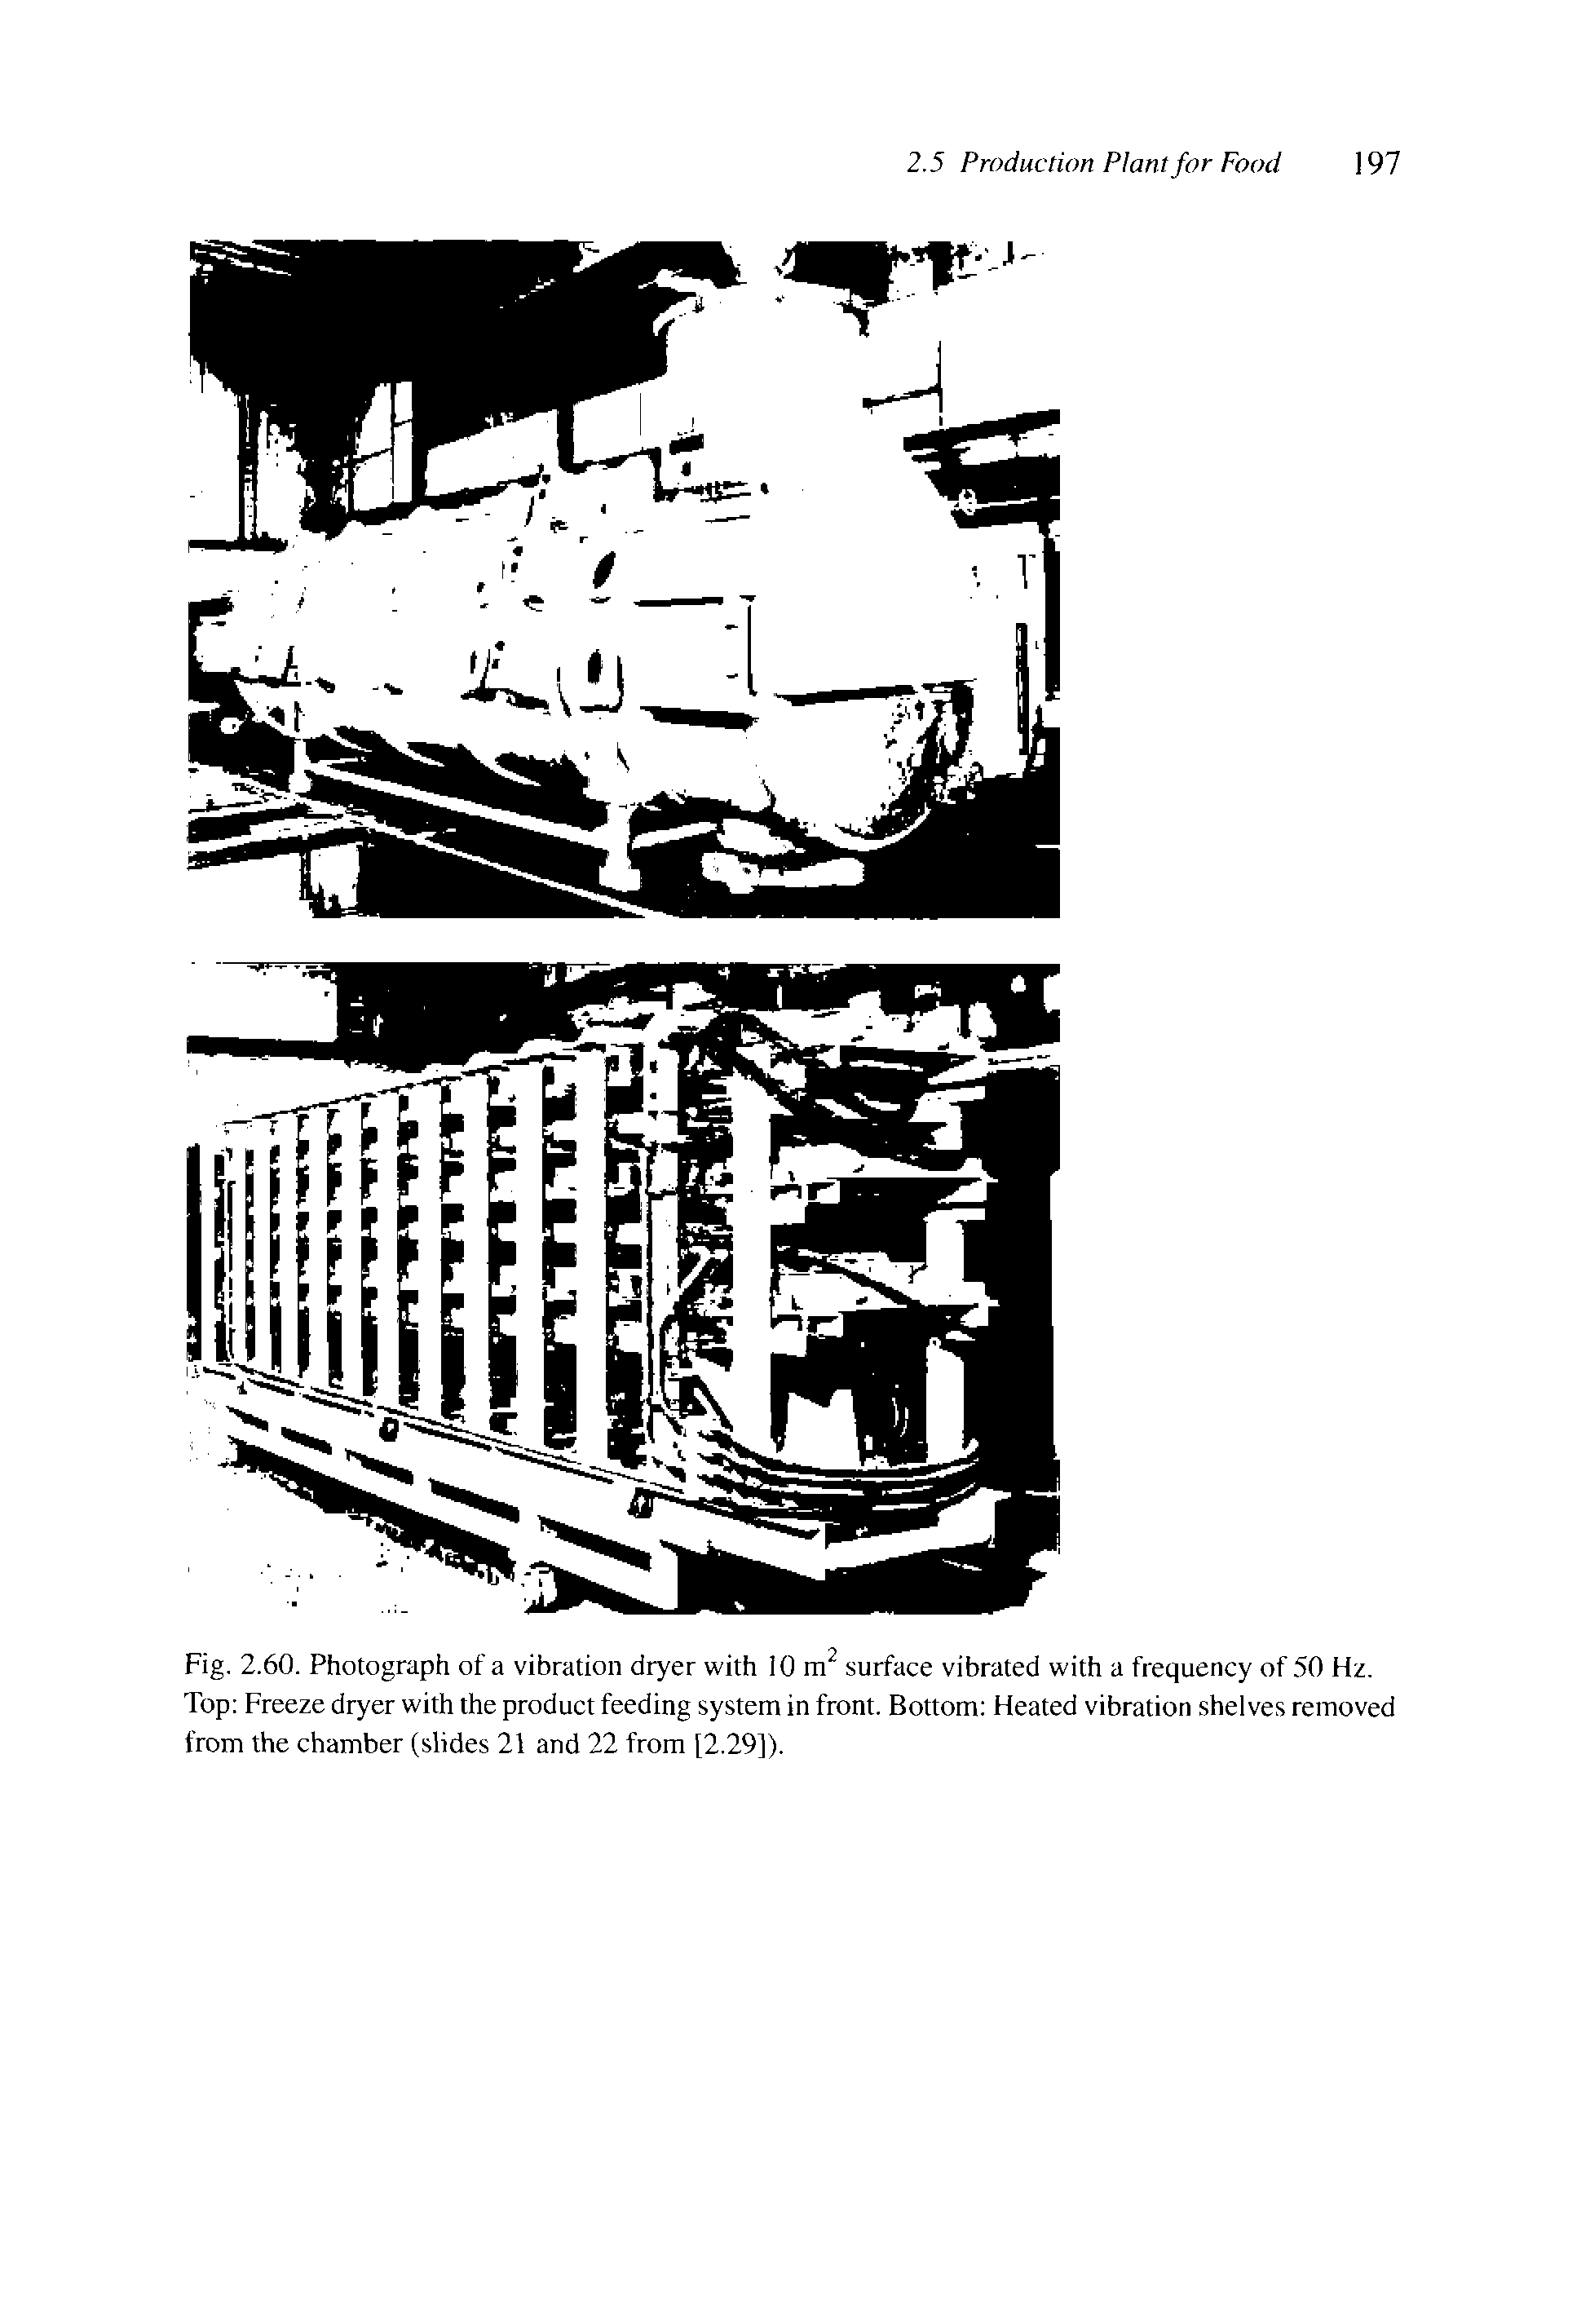 Fig. 2.60. Photograph of a vibration dryer with 10 m2 surface vibrated with a frequency of 50 Hz. Top Freeze dryer with the product feeding system in front. Bottom Heated vibration shelves removed from the chamber (slides 21 and 22 from [2.29]).